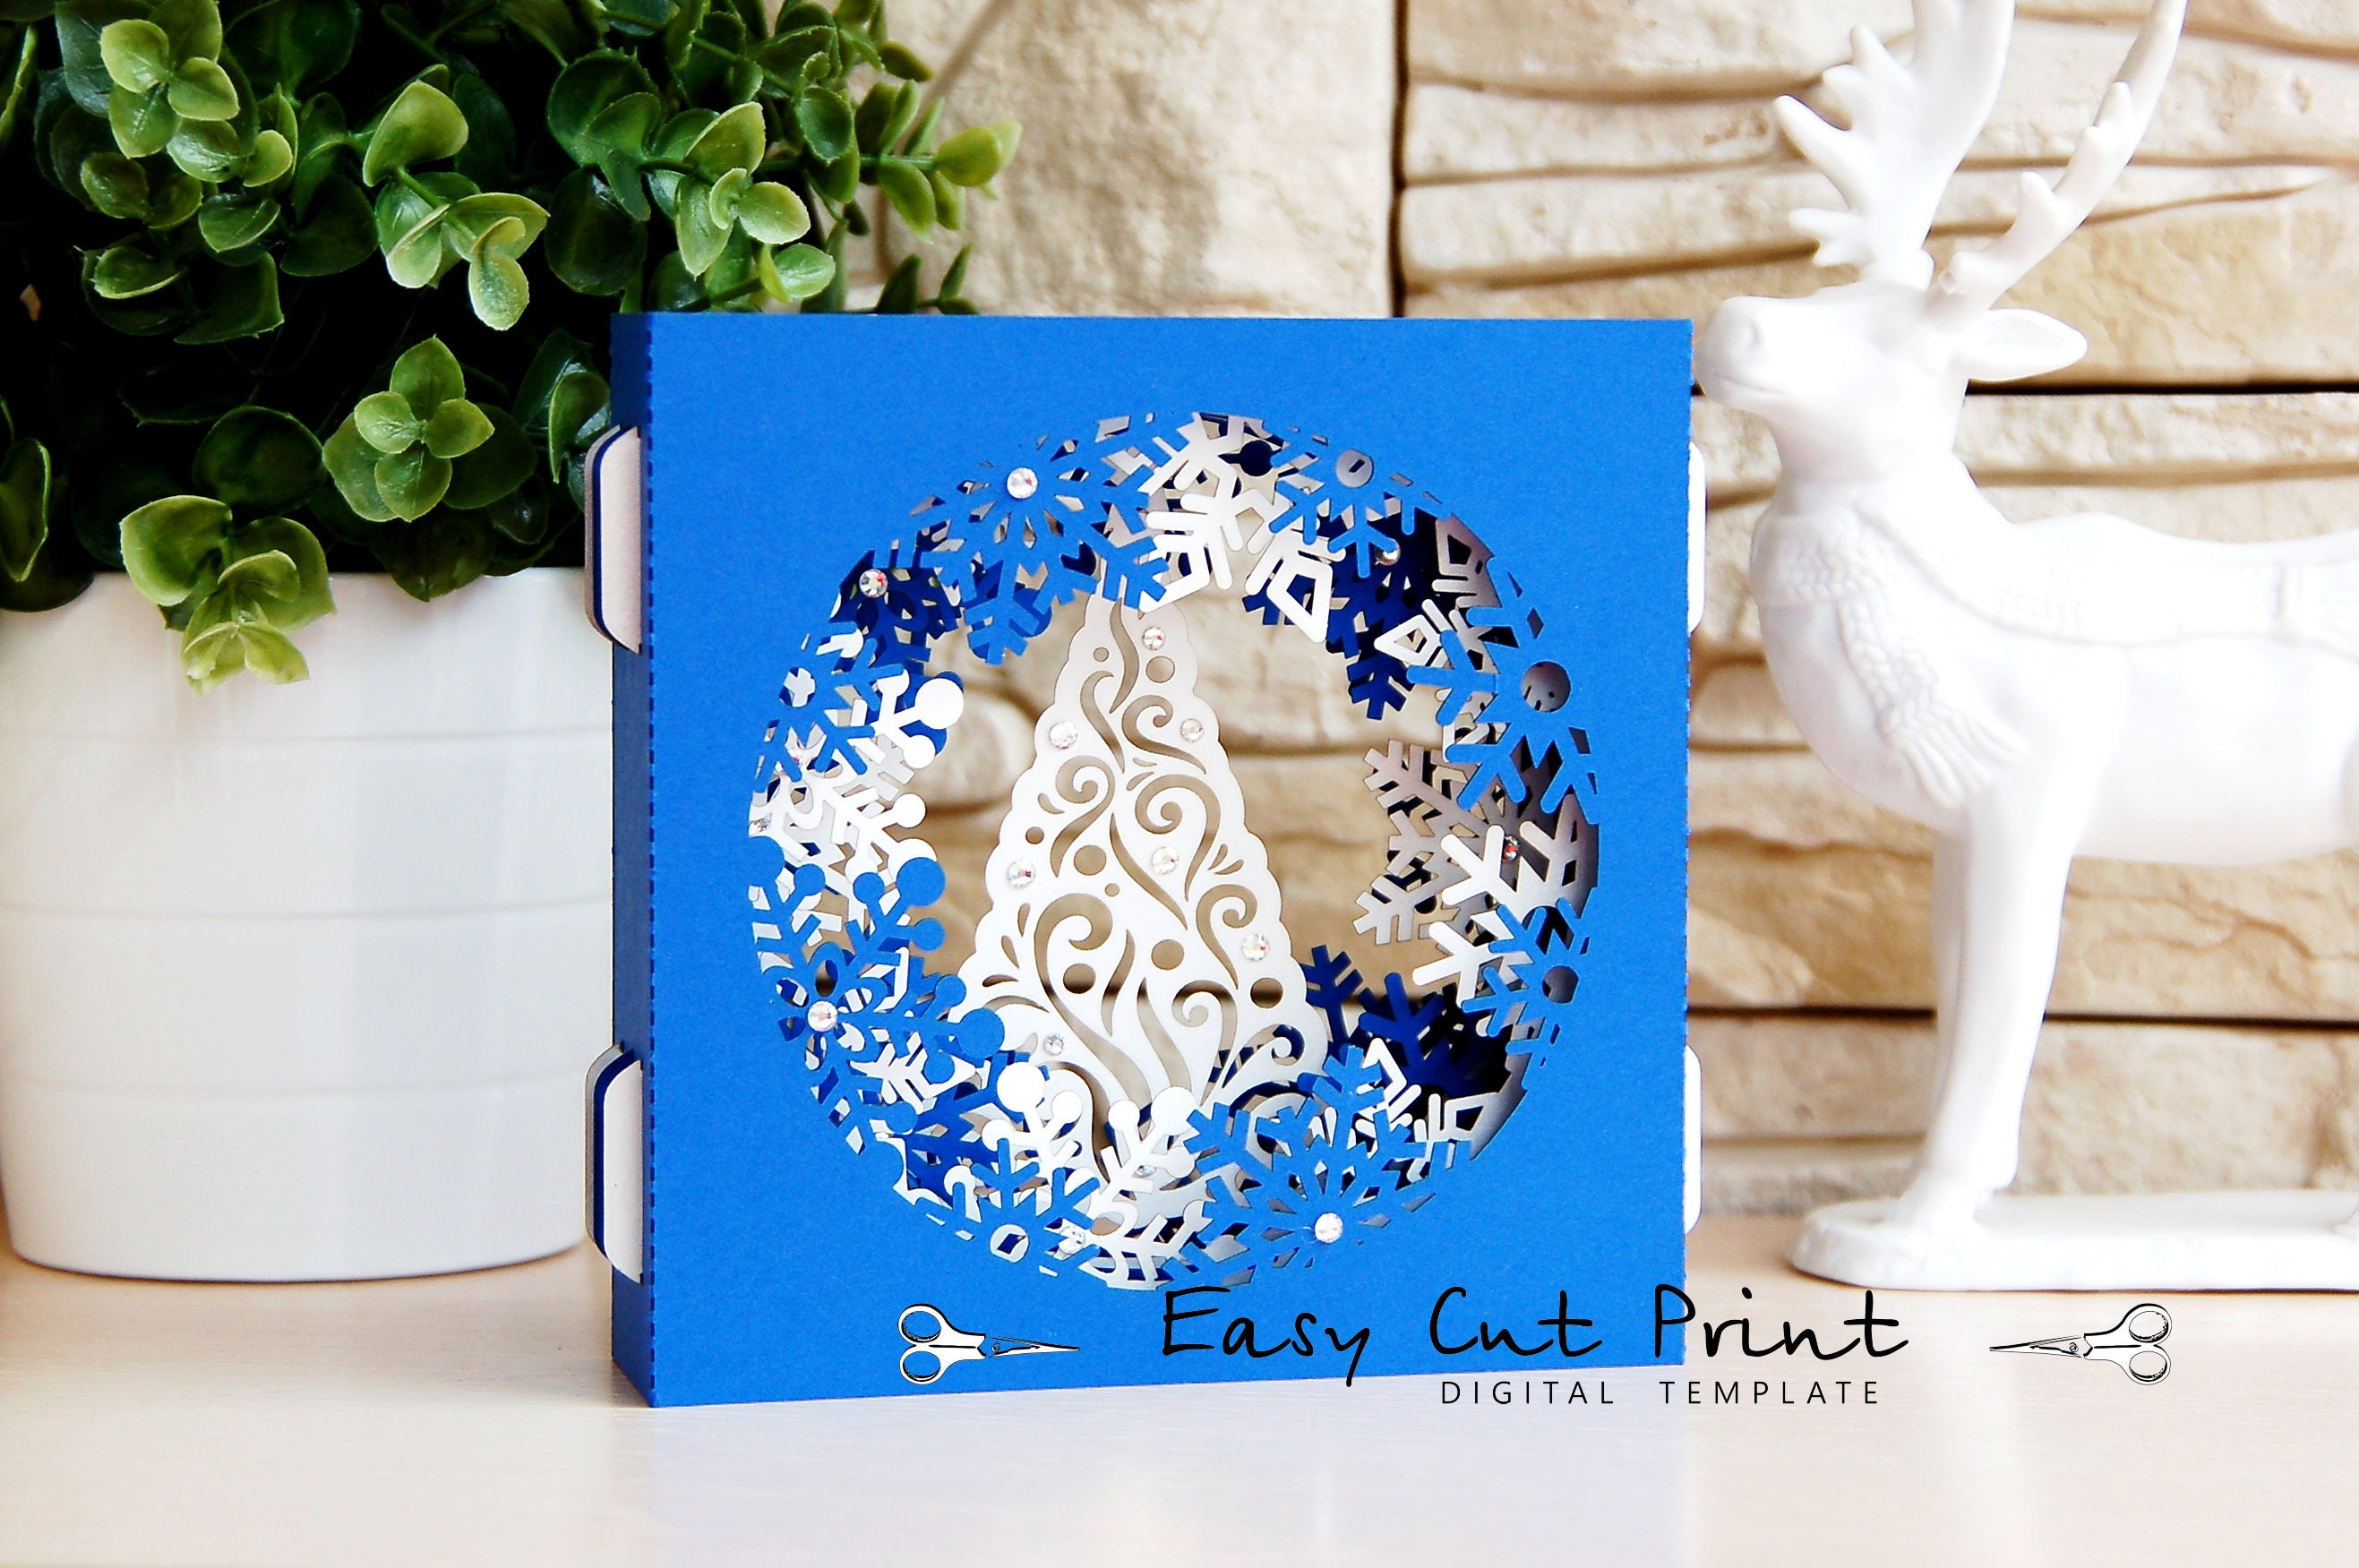 Download Snowflake Christmas Shadow box gift 3D Card Laser cut template